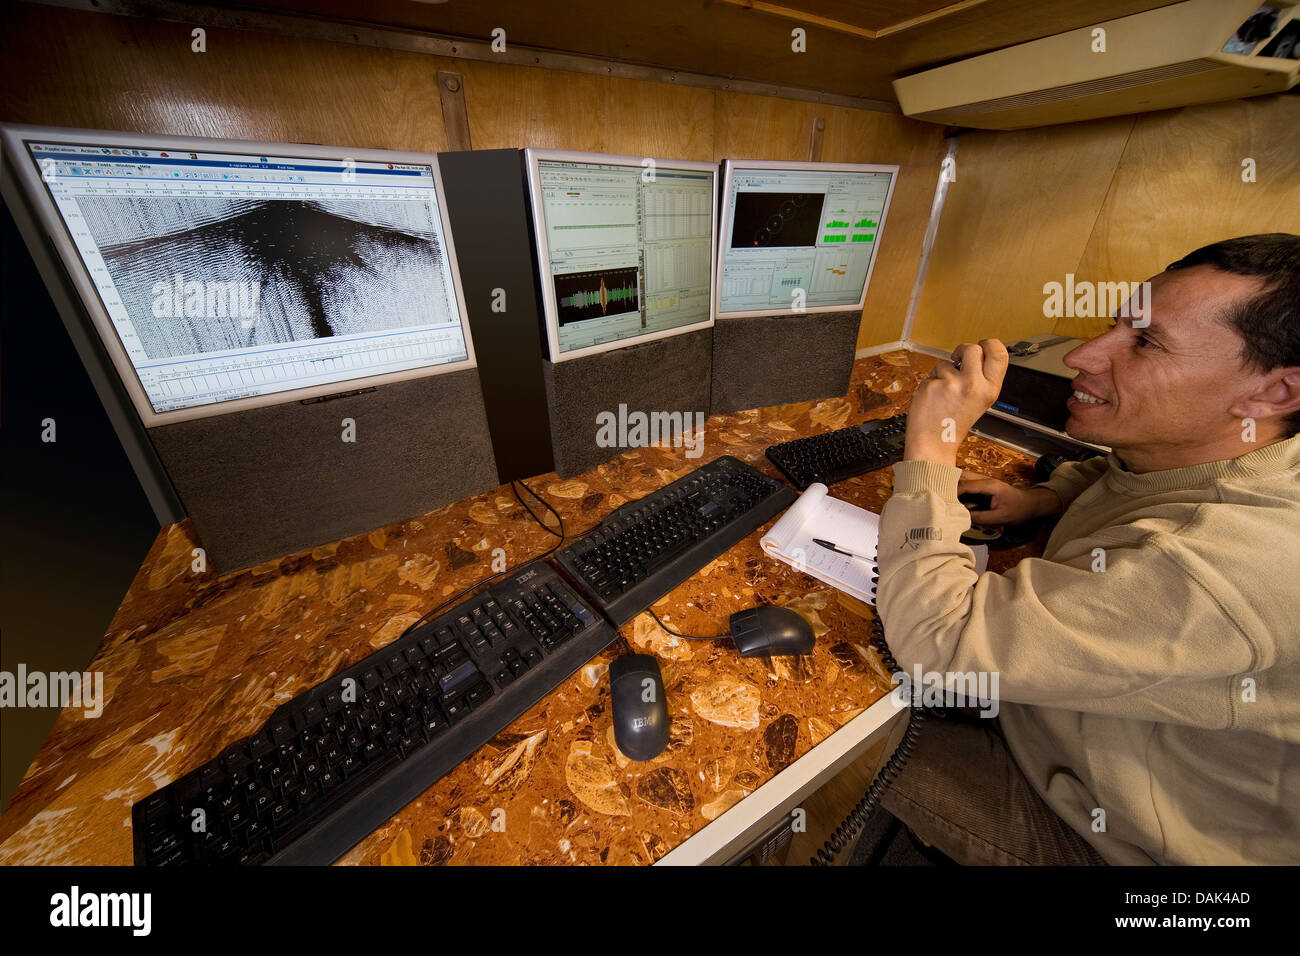 Inside truck of oil exploration seismic monitoring mobile base station, Mali, West Africa Stock Photo